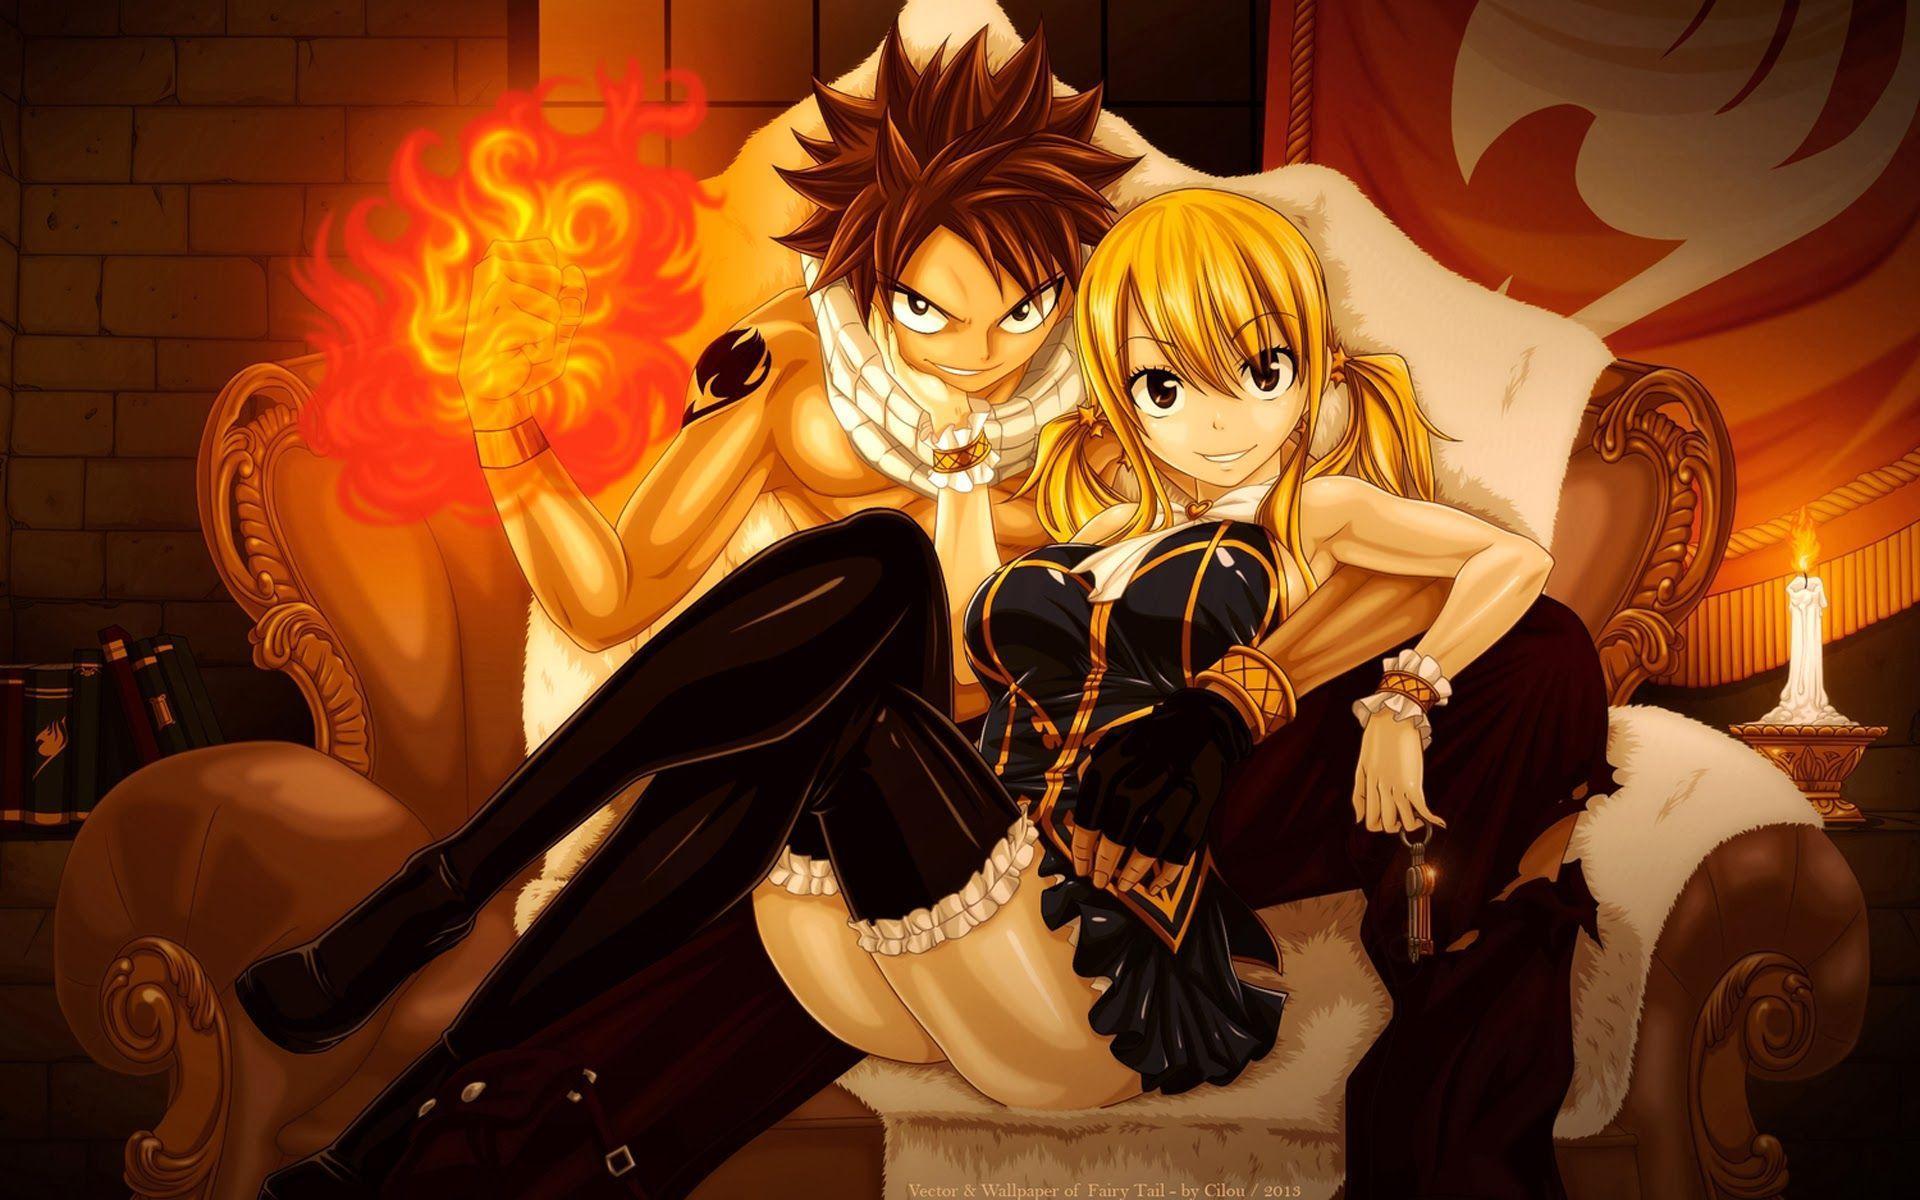 Marvelous Fairy Tail Wallpaper 1920x1200PX Fairy Tail Wallpaper